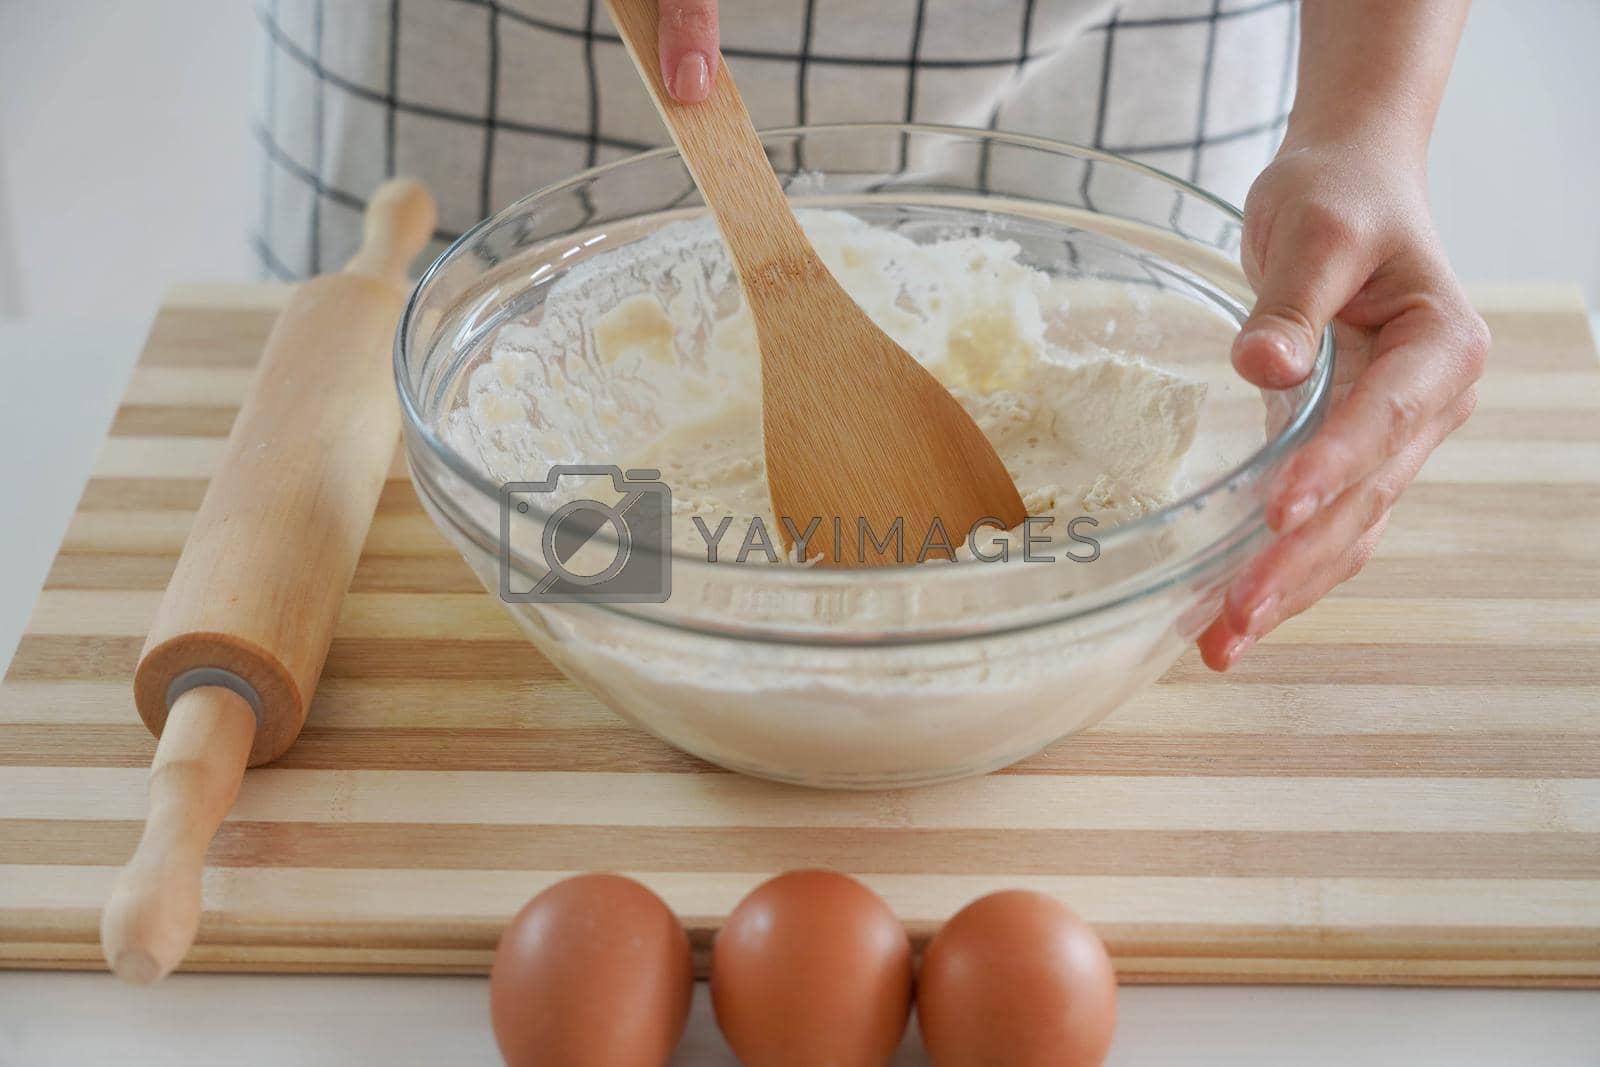 Royalty free image of Woman kneads with a wooden spoon in a bowl at home, close-up by sergio_monti